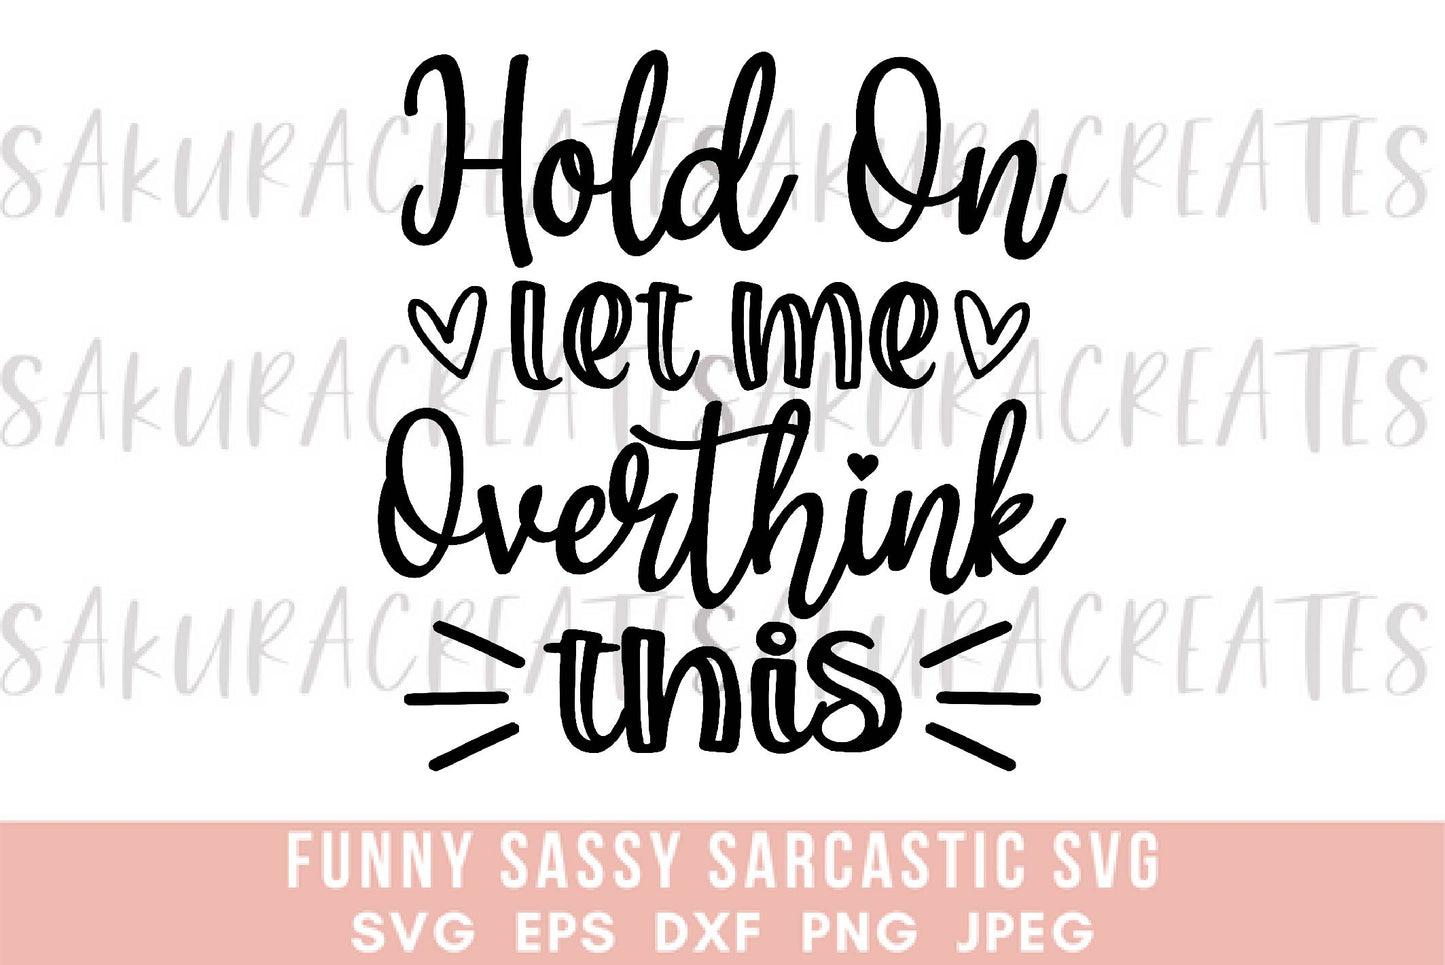 Hold on let me overthink this SVG DXF EPS PNG JPEG SVG cut file silhouette cricut funny sarcastic sassy quotes sayings